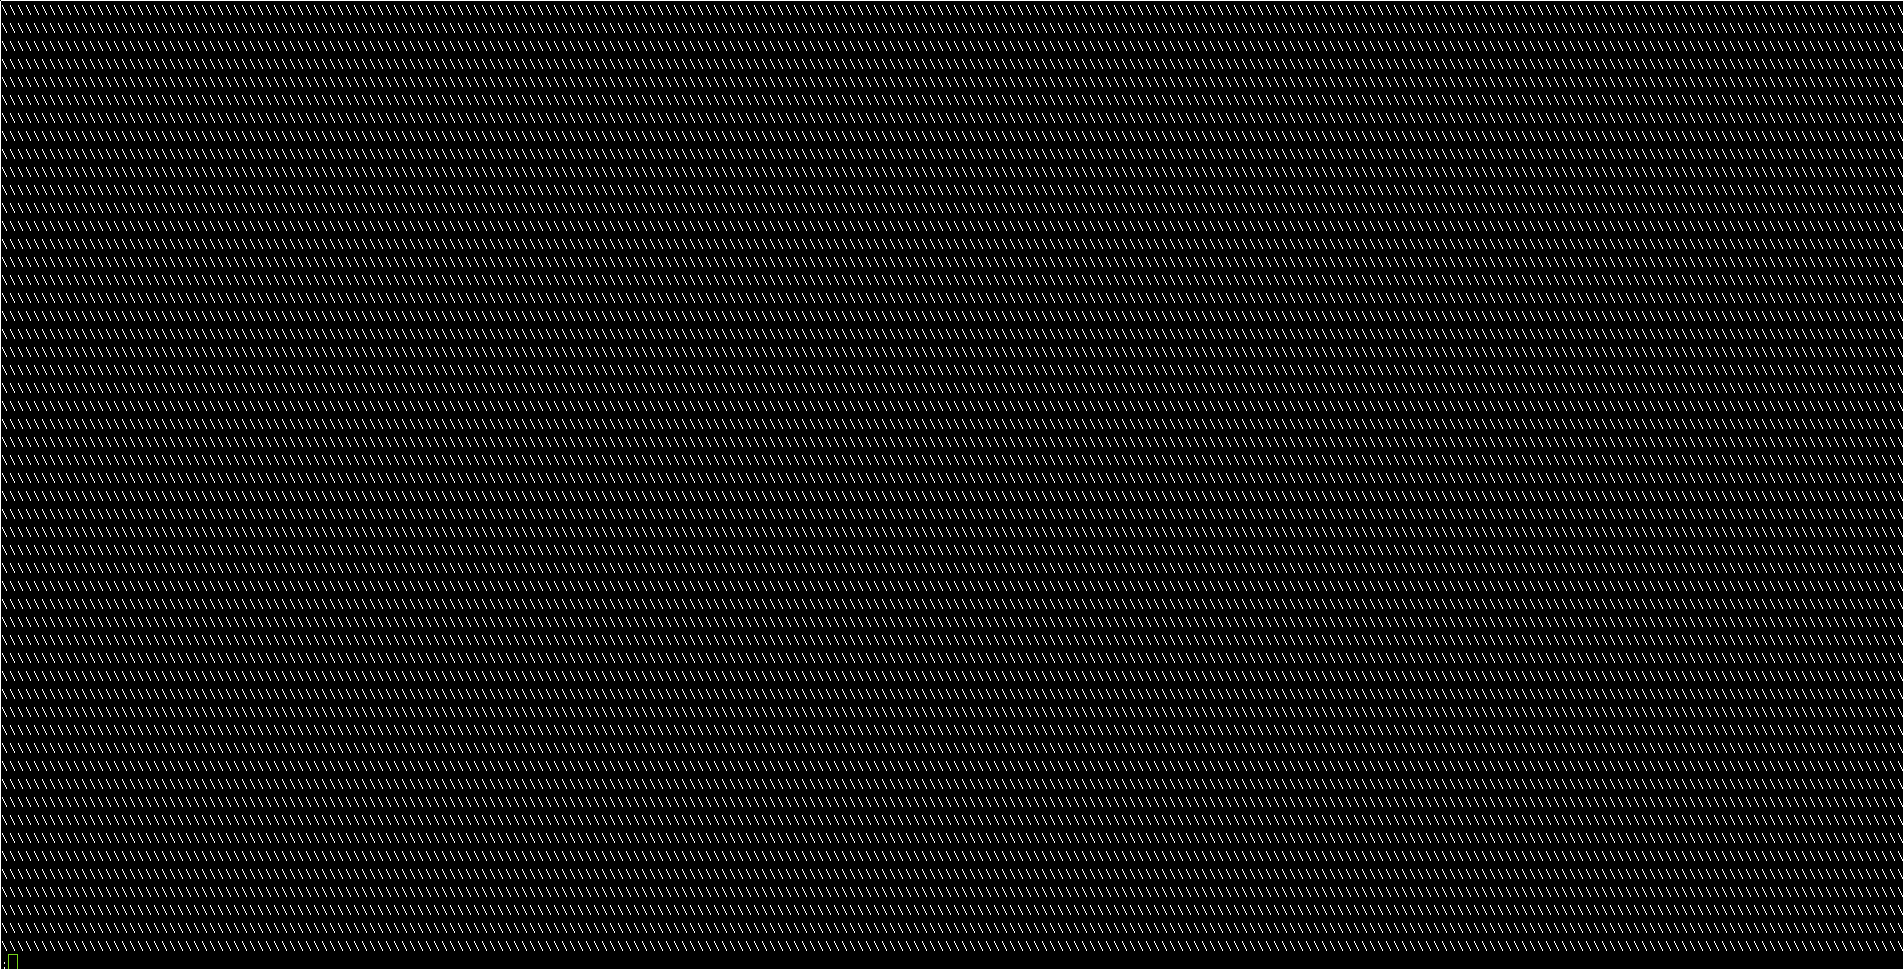 A screenshot of a terminal, completely filled with '/'. Nothing else. No, really. I'm not being lazy here. Just an entire terminal, filled with '/'.